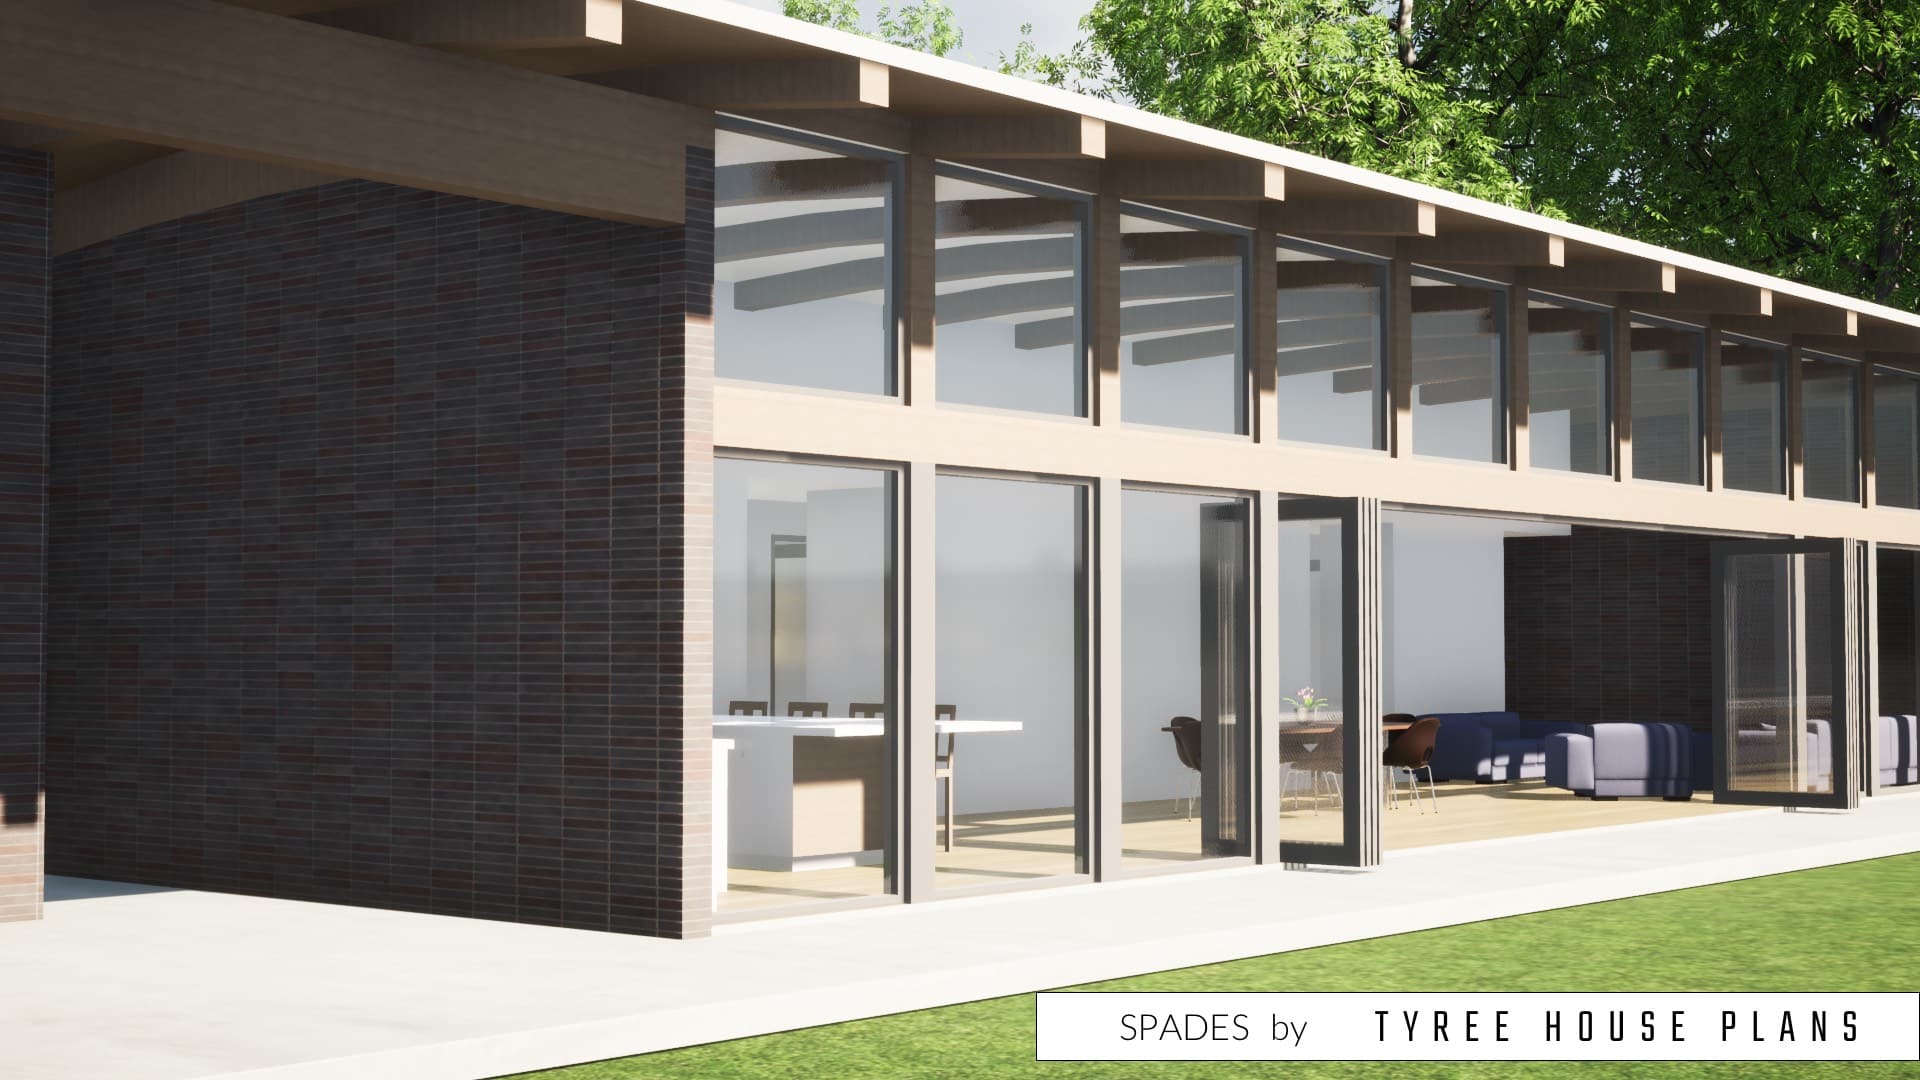 Spades by Tyree House Plans.